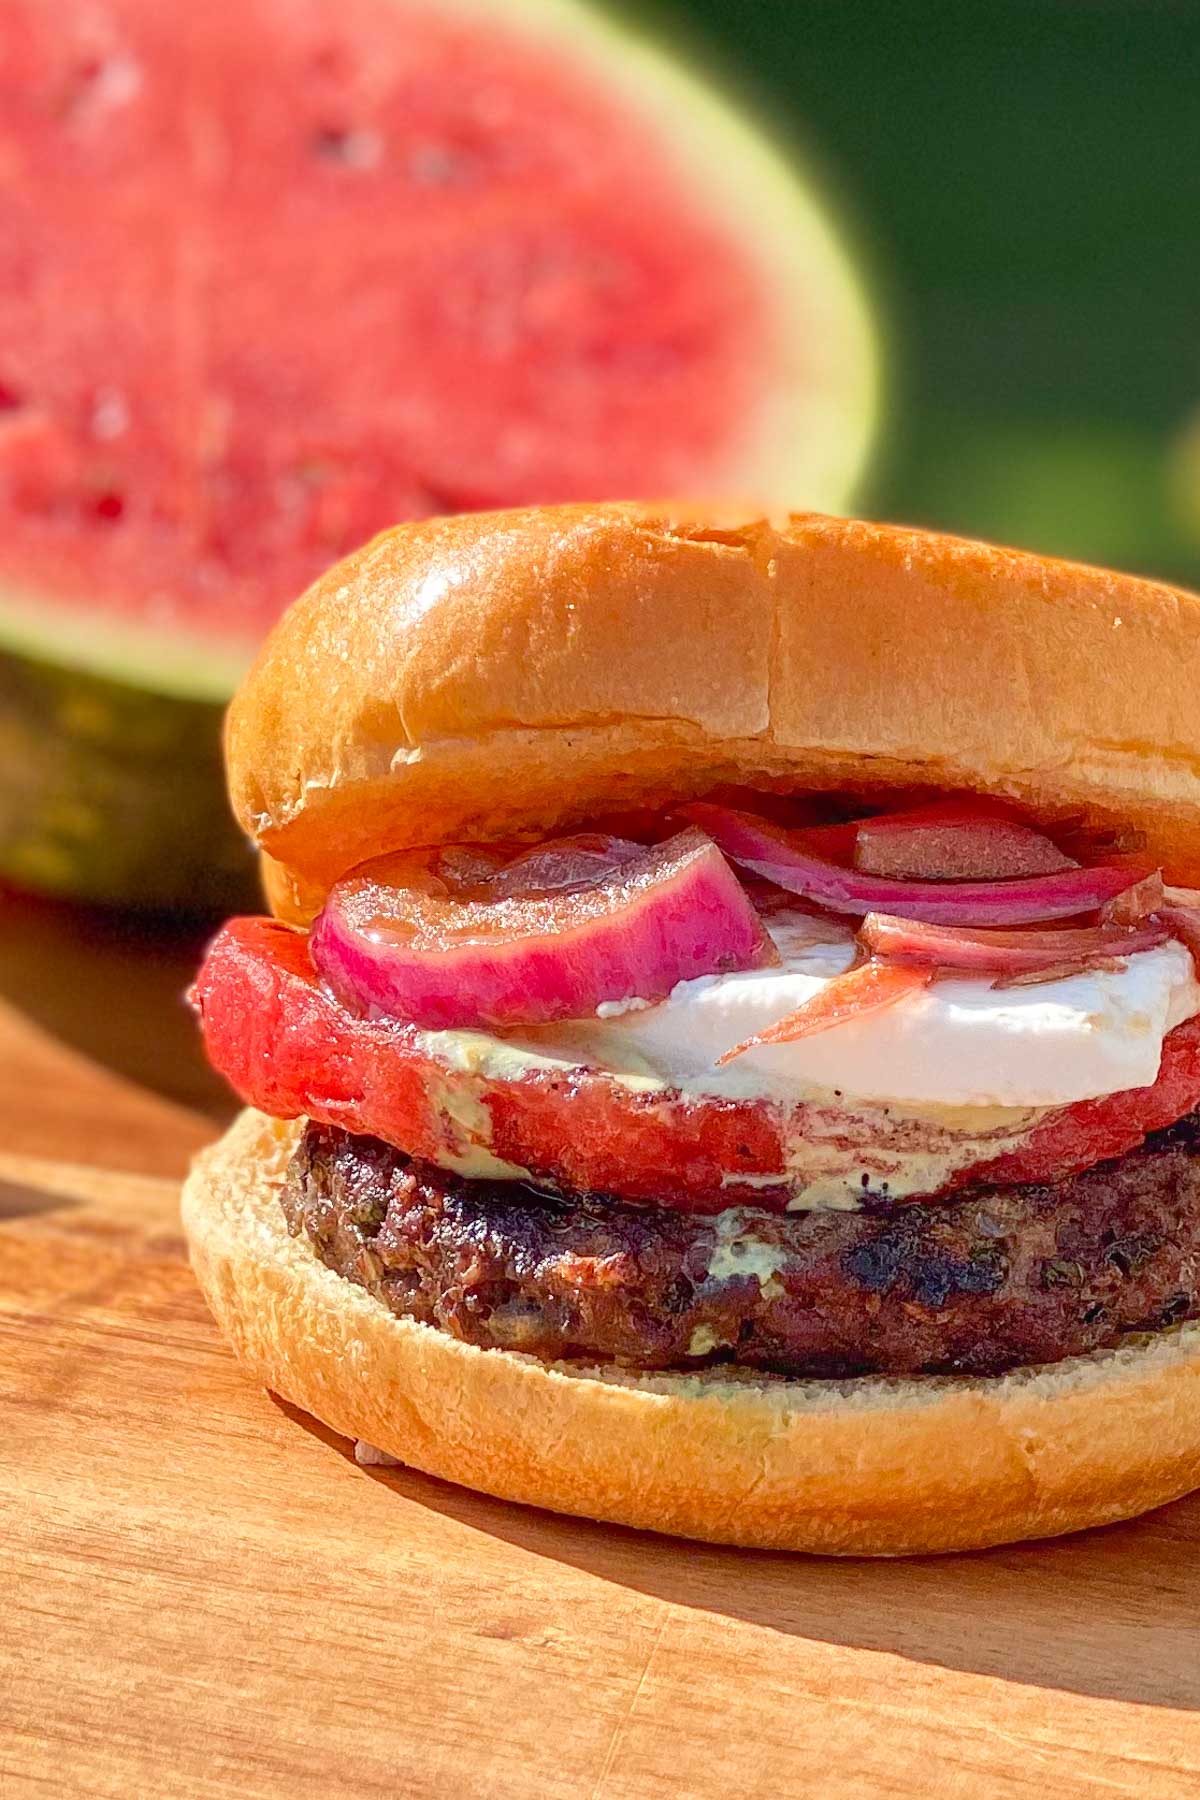 Grilled beef burger with watermelon, feta cheese, and red onions, whole watermelon in background.